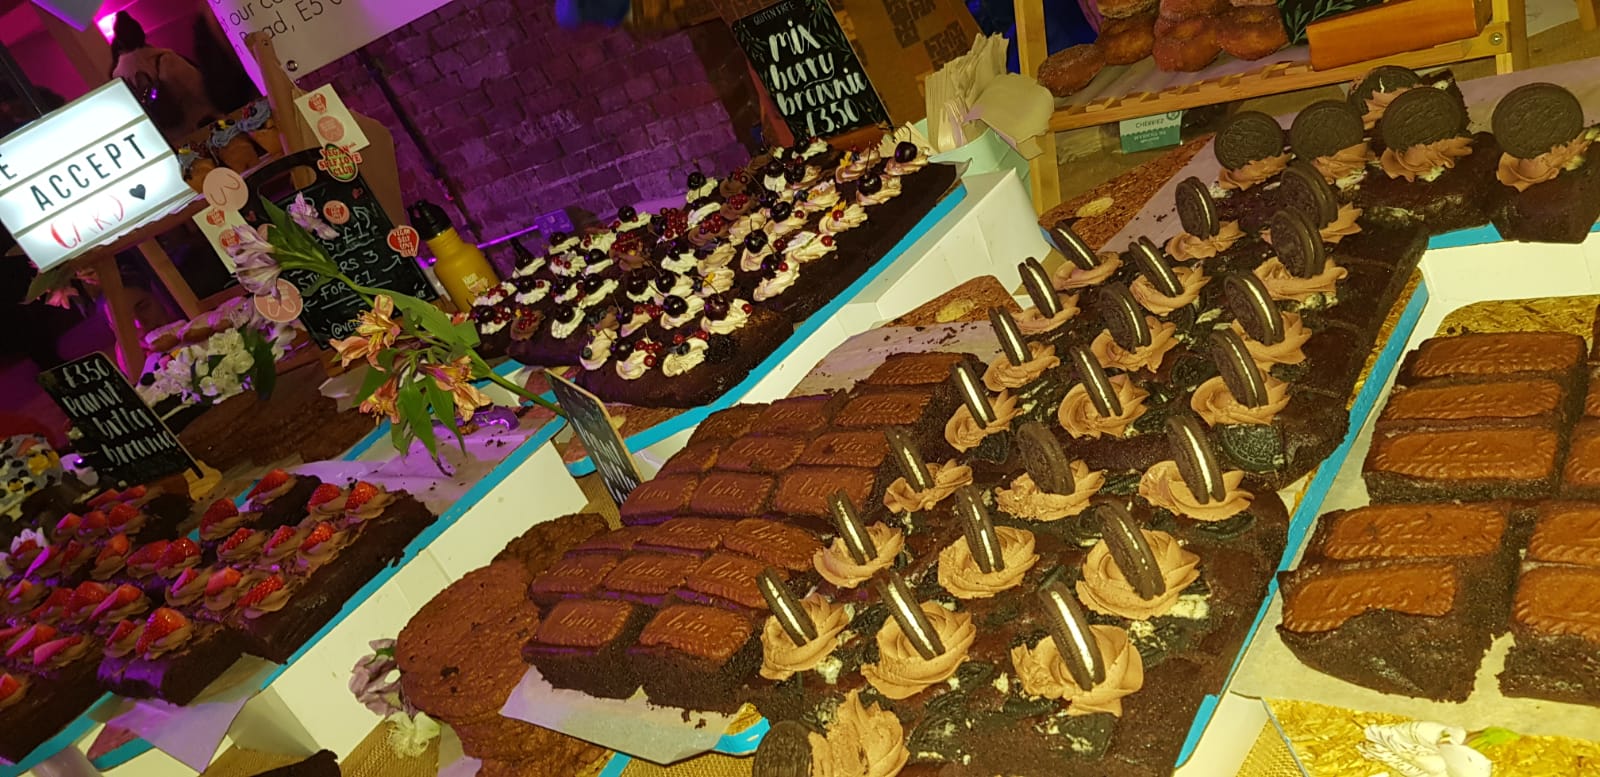 Biscuits, cakes and peanut-butter filled brownies!